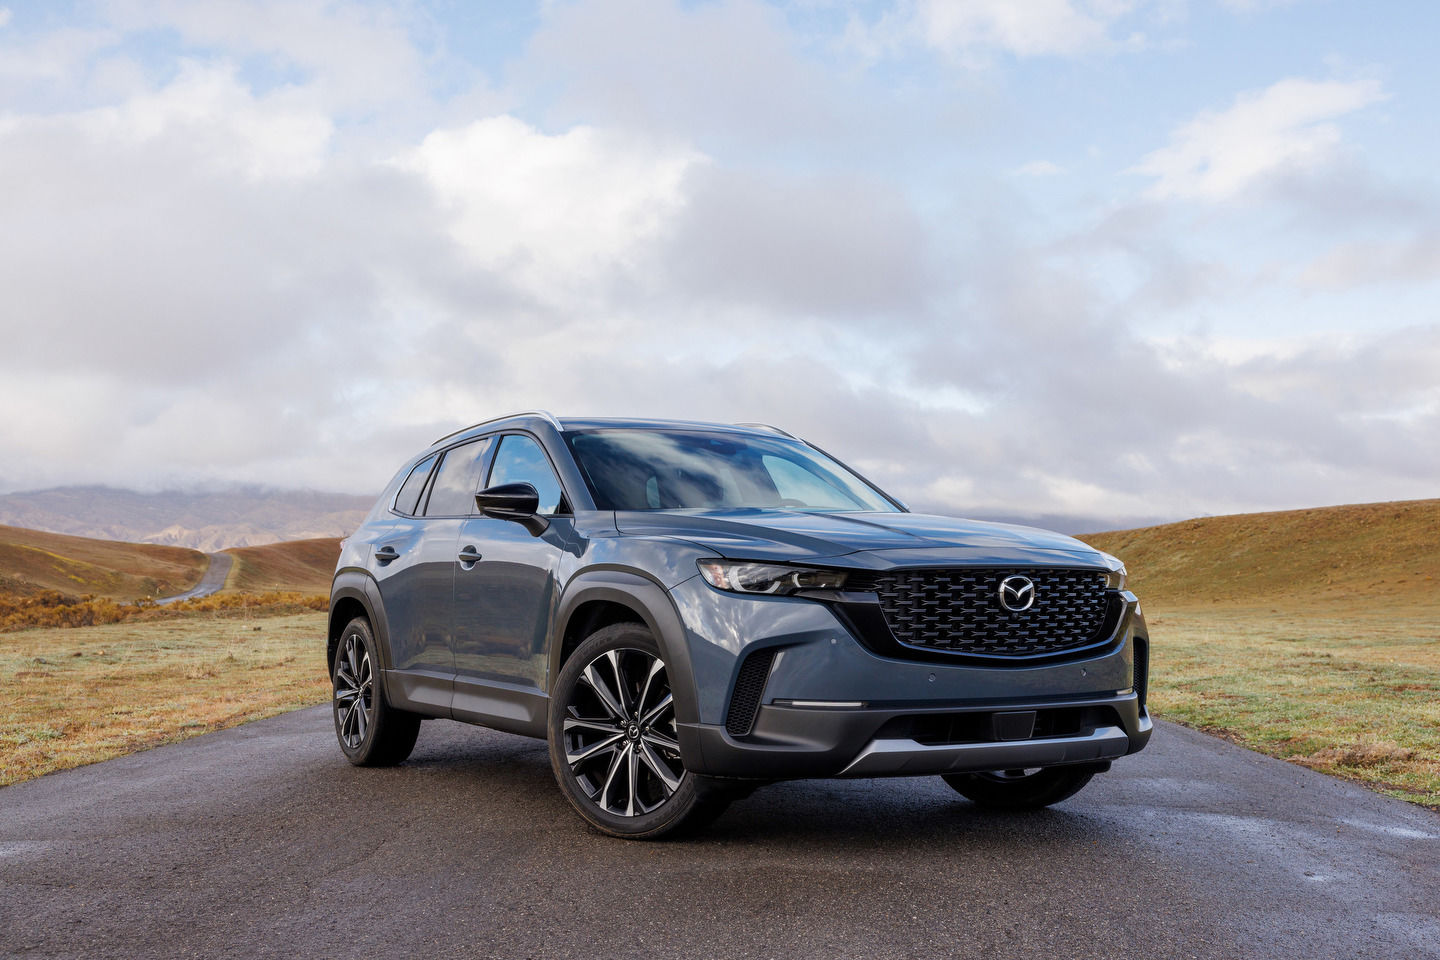 What Makes the 2023 Mazda CX-50 and the 2023 Mazda CX-9 different?